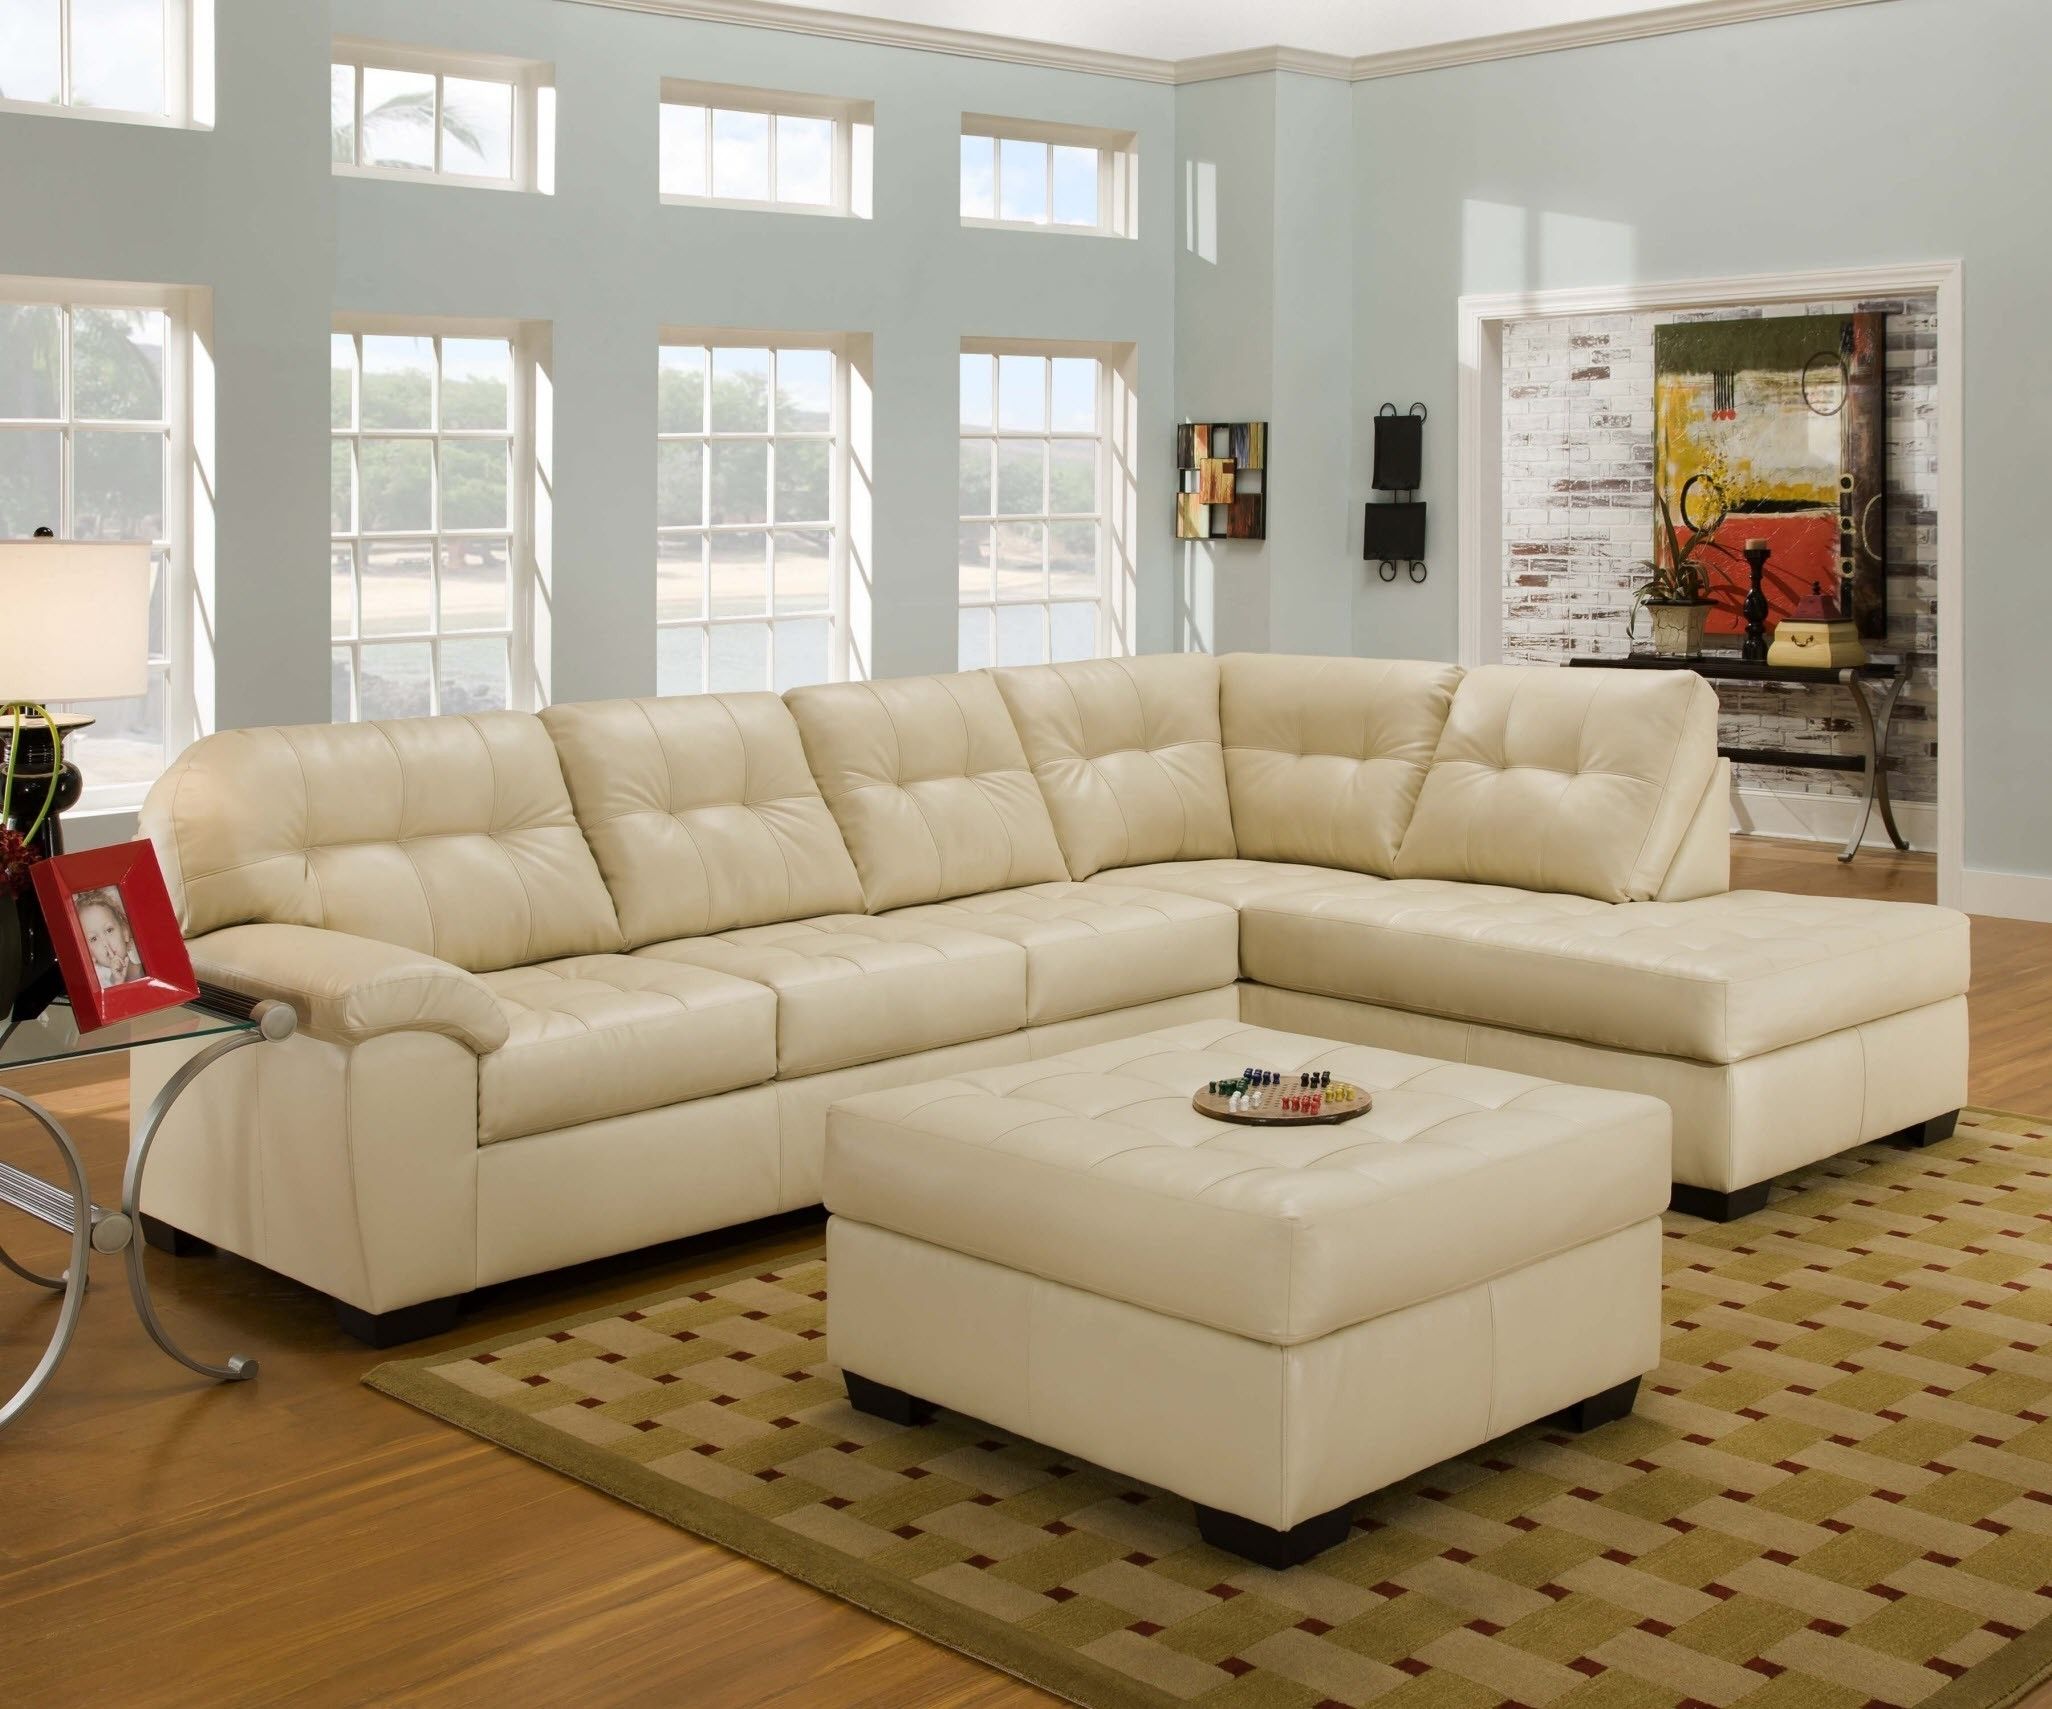 Sofa : Suede Sectional Sofas Leather Sofa Set Sectional Sofa Set With Regard To Tufted Sectional Sofas With Chaise (View 9 of 10)